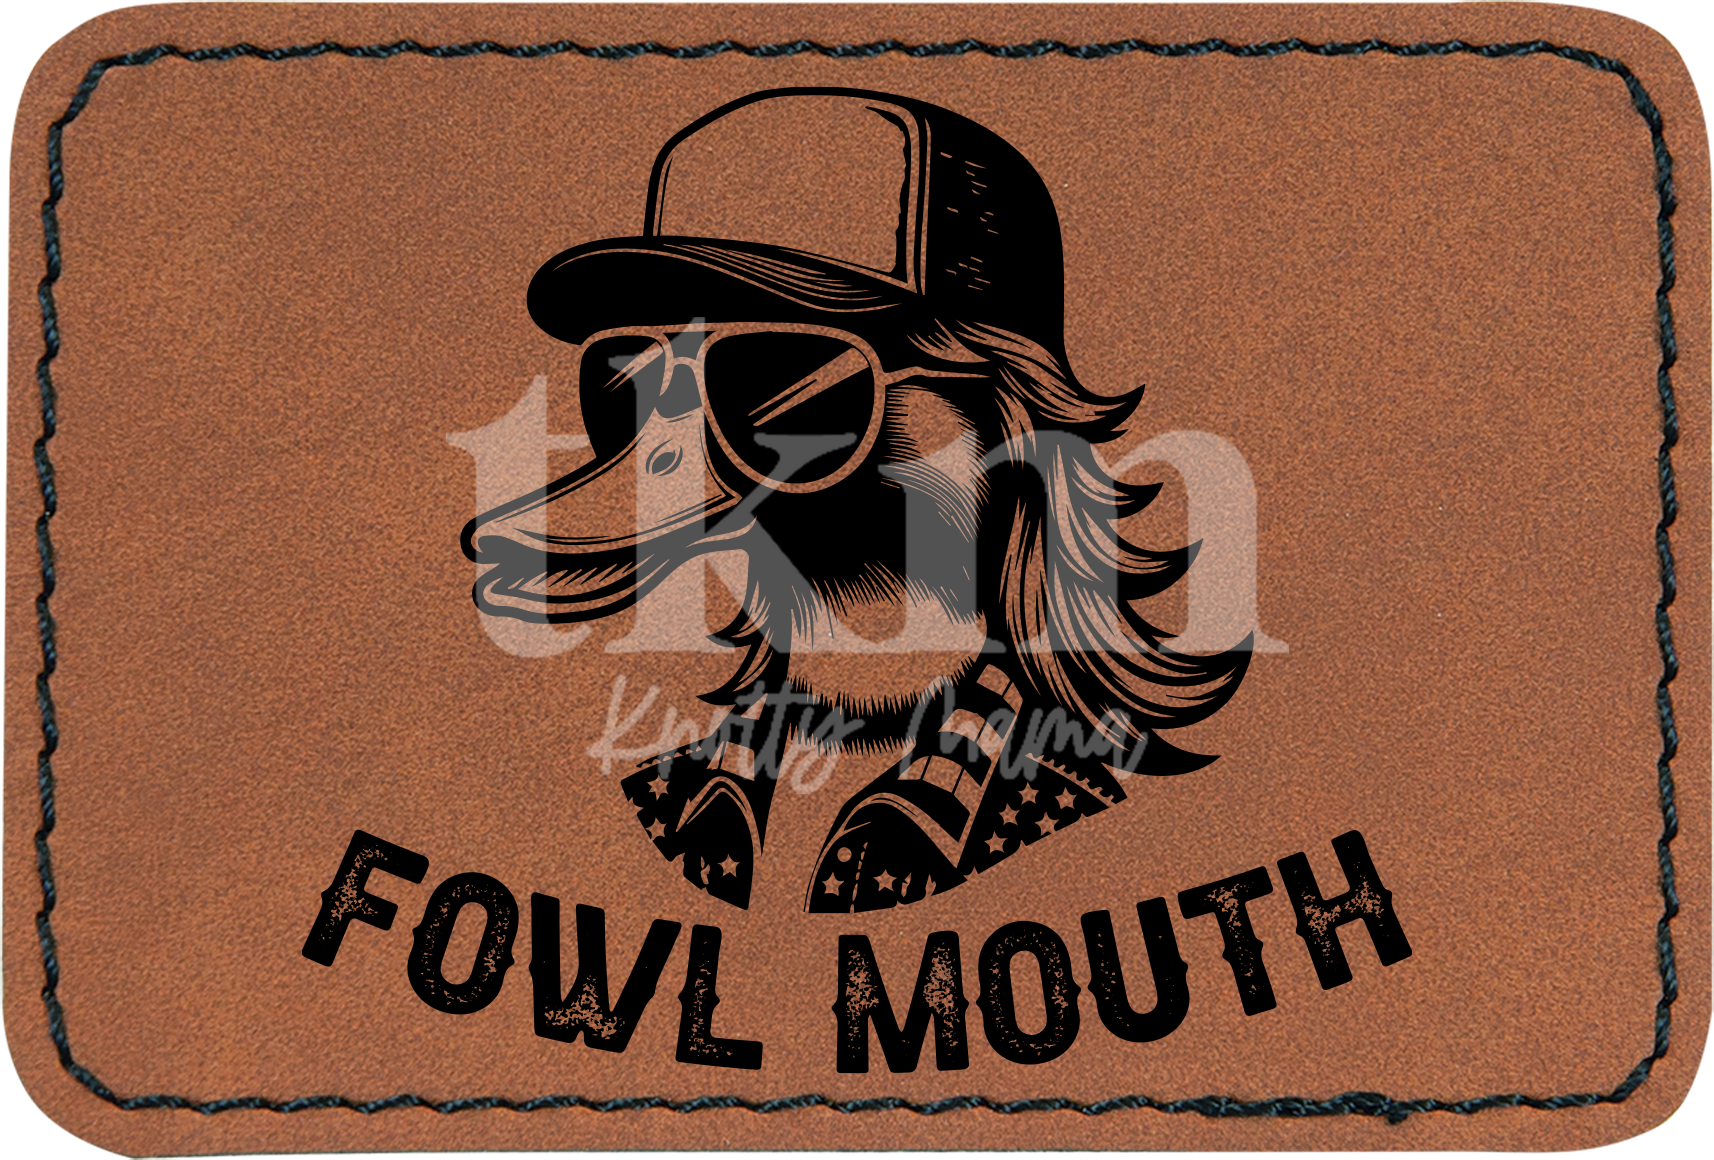 Fowl Mouth Patch